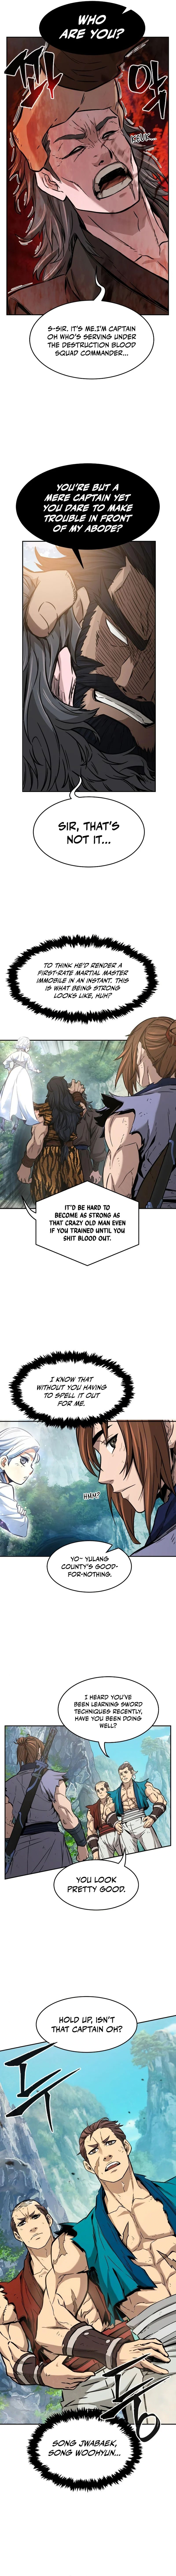 Absolute Sword Sense - Chapter 14 Page 6